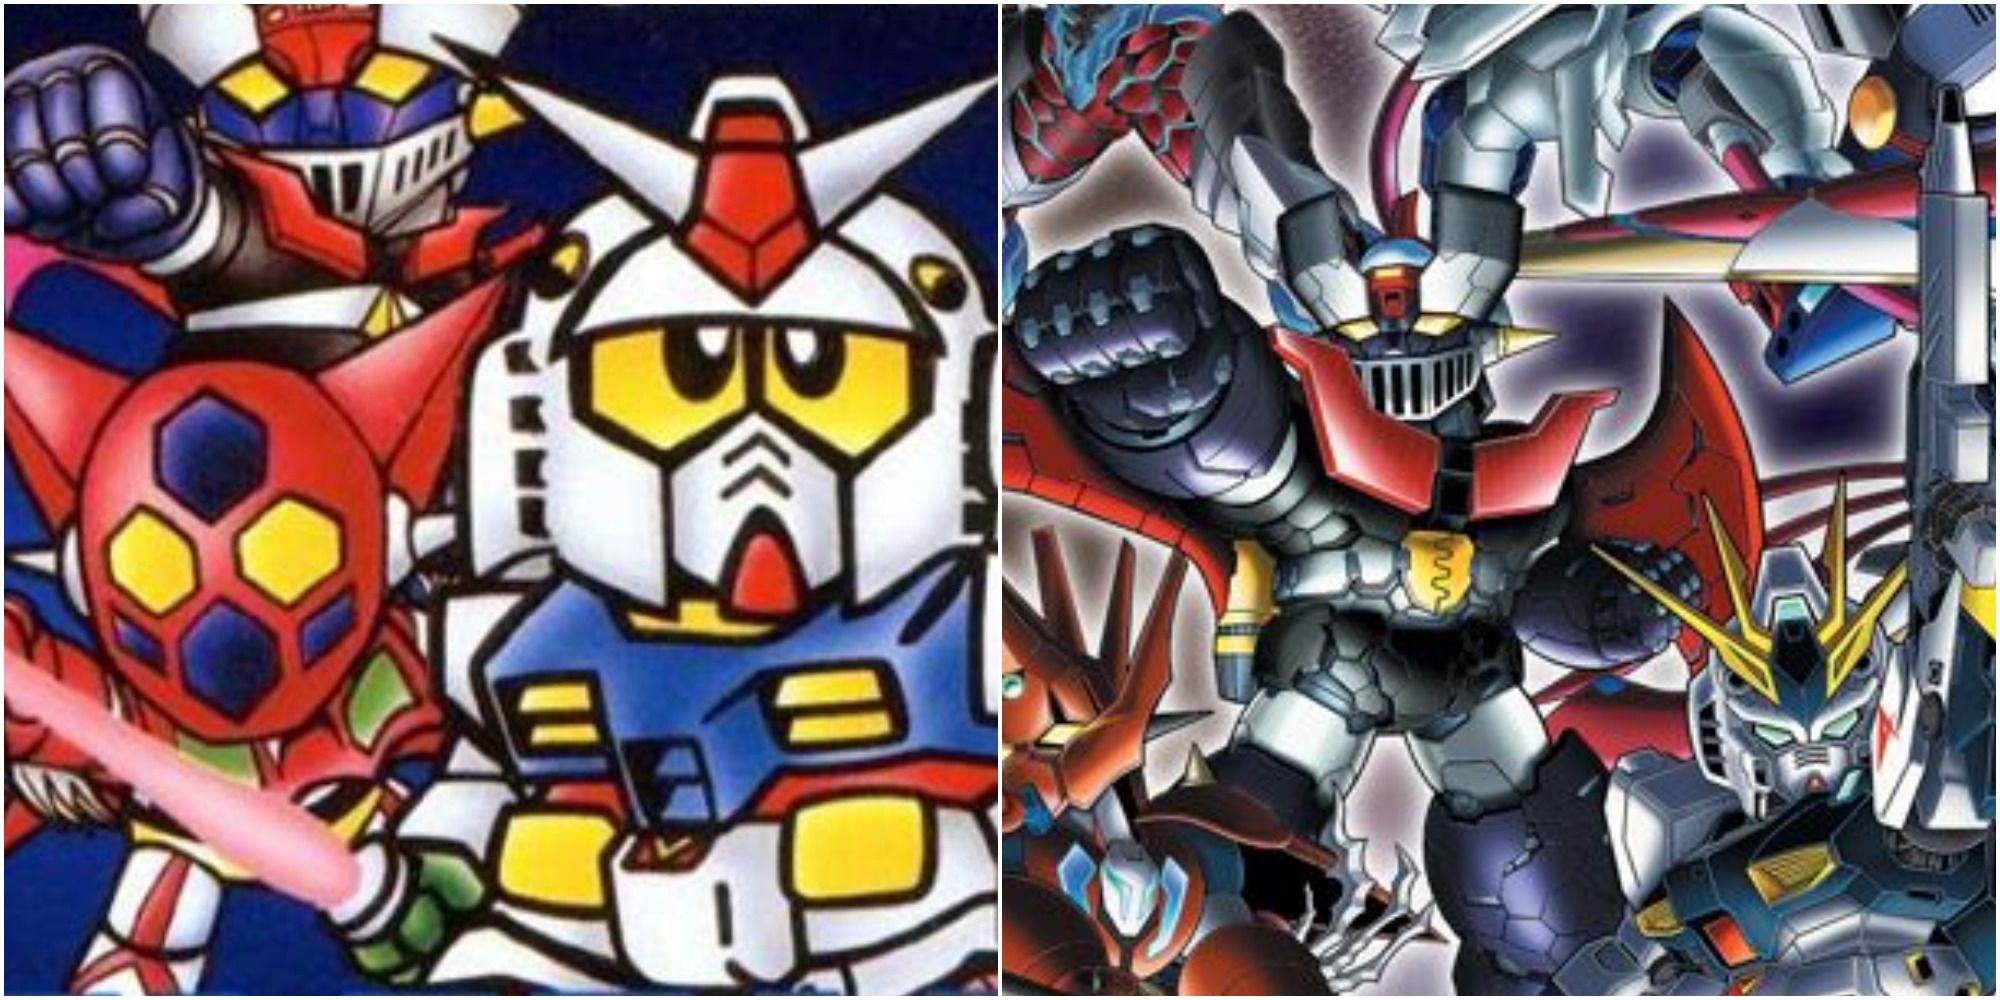 Things You Didn't Know About Super Robot Wars